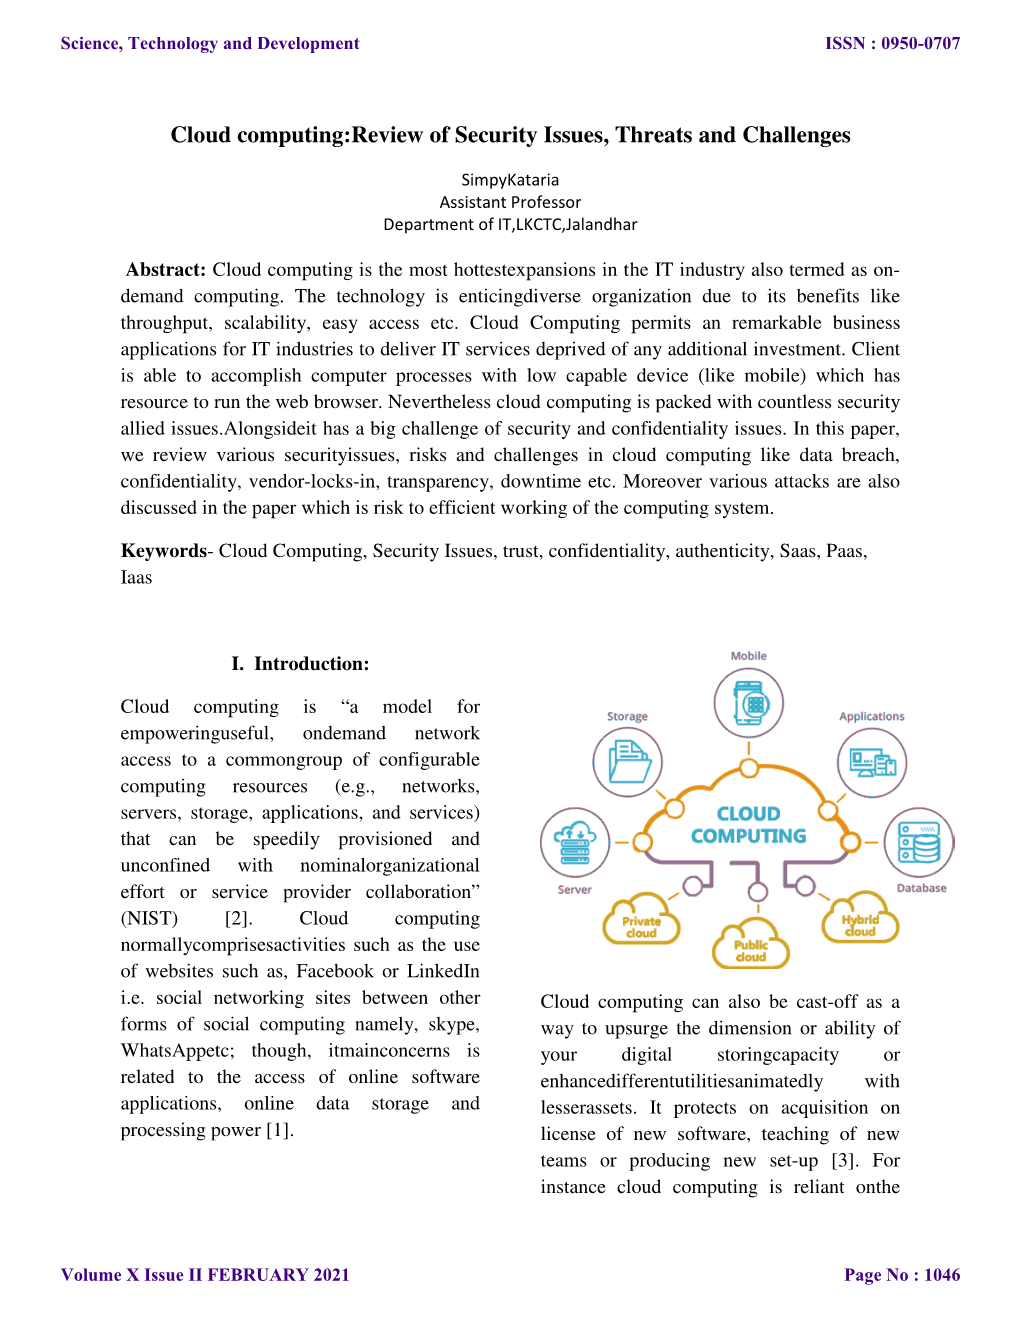 Cloud Computing:Review of Security Issues, Threats and Challenges